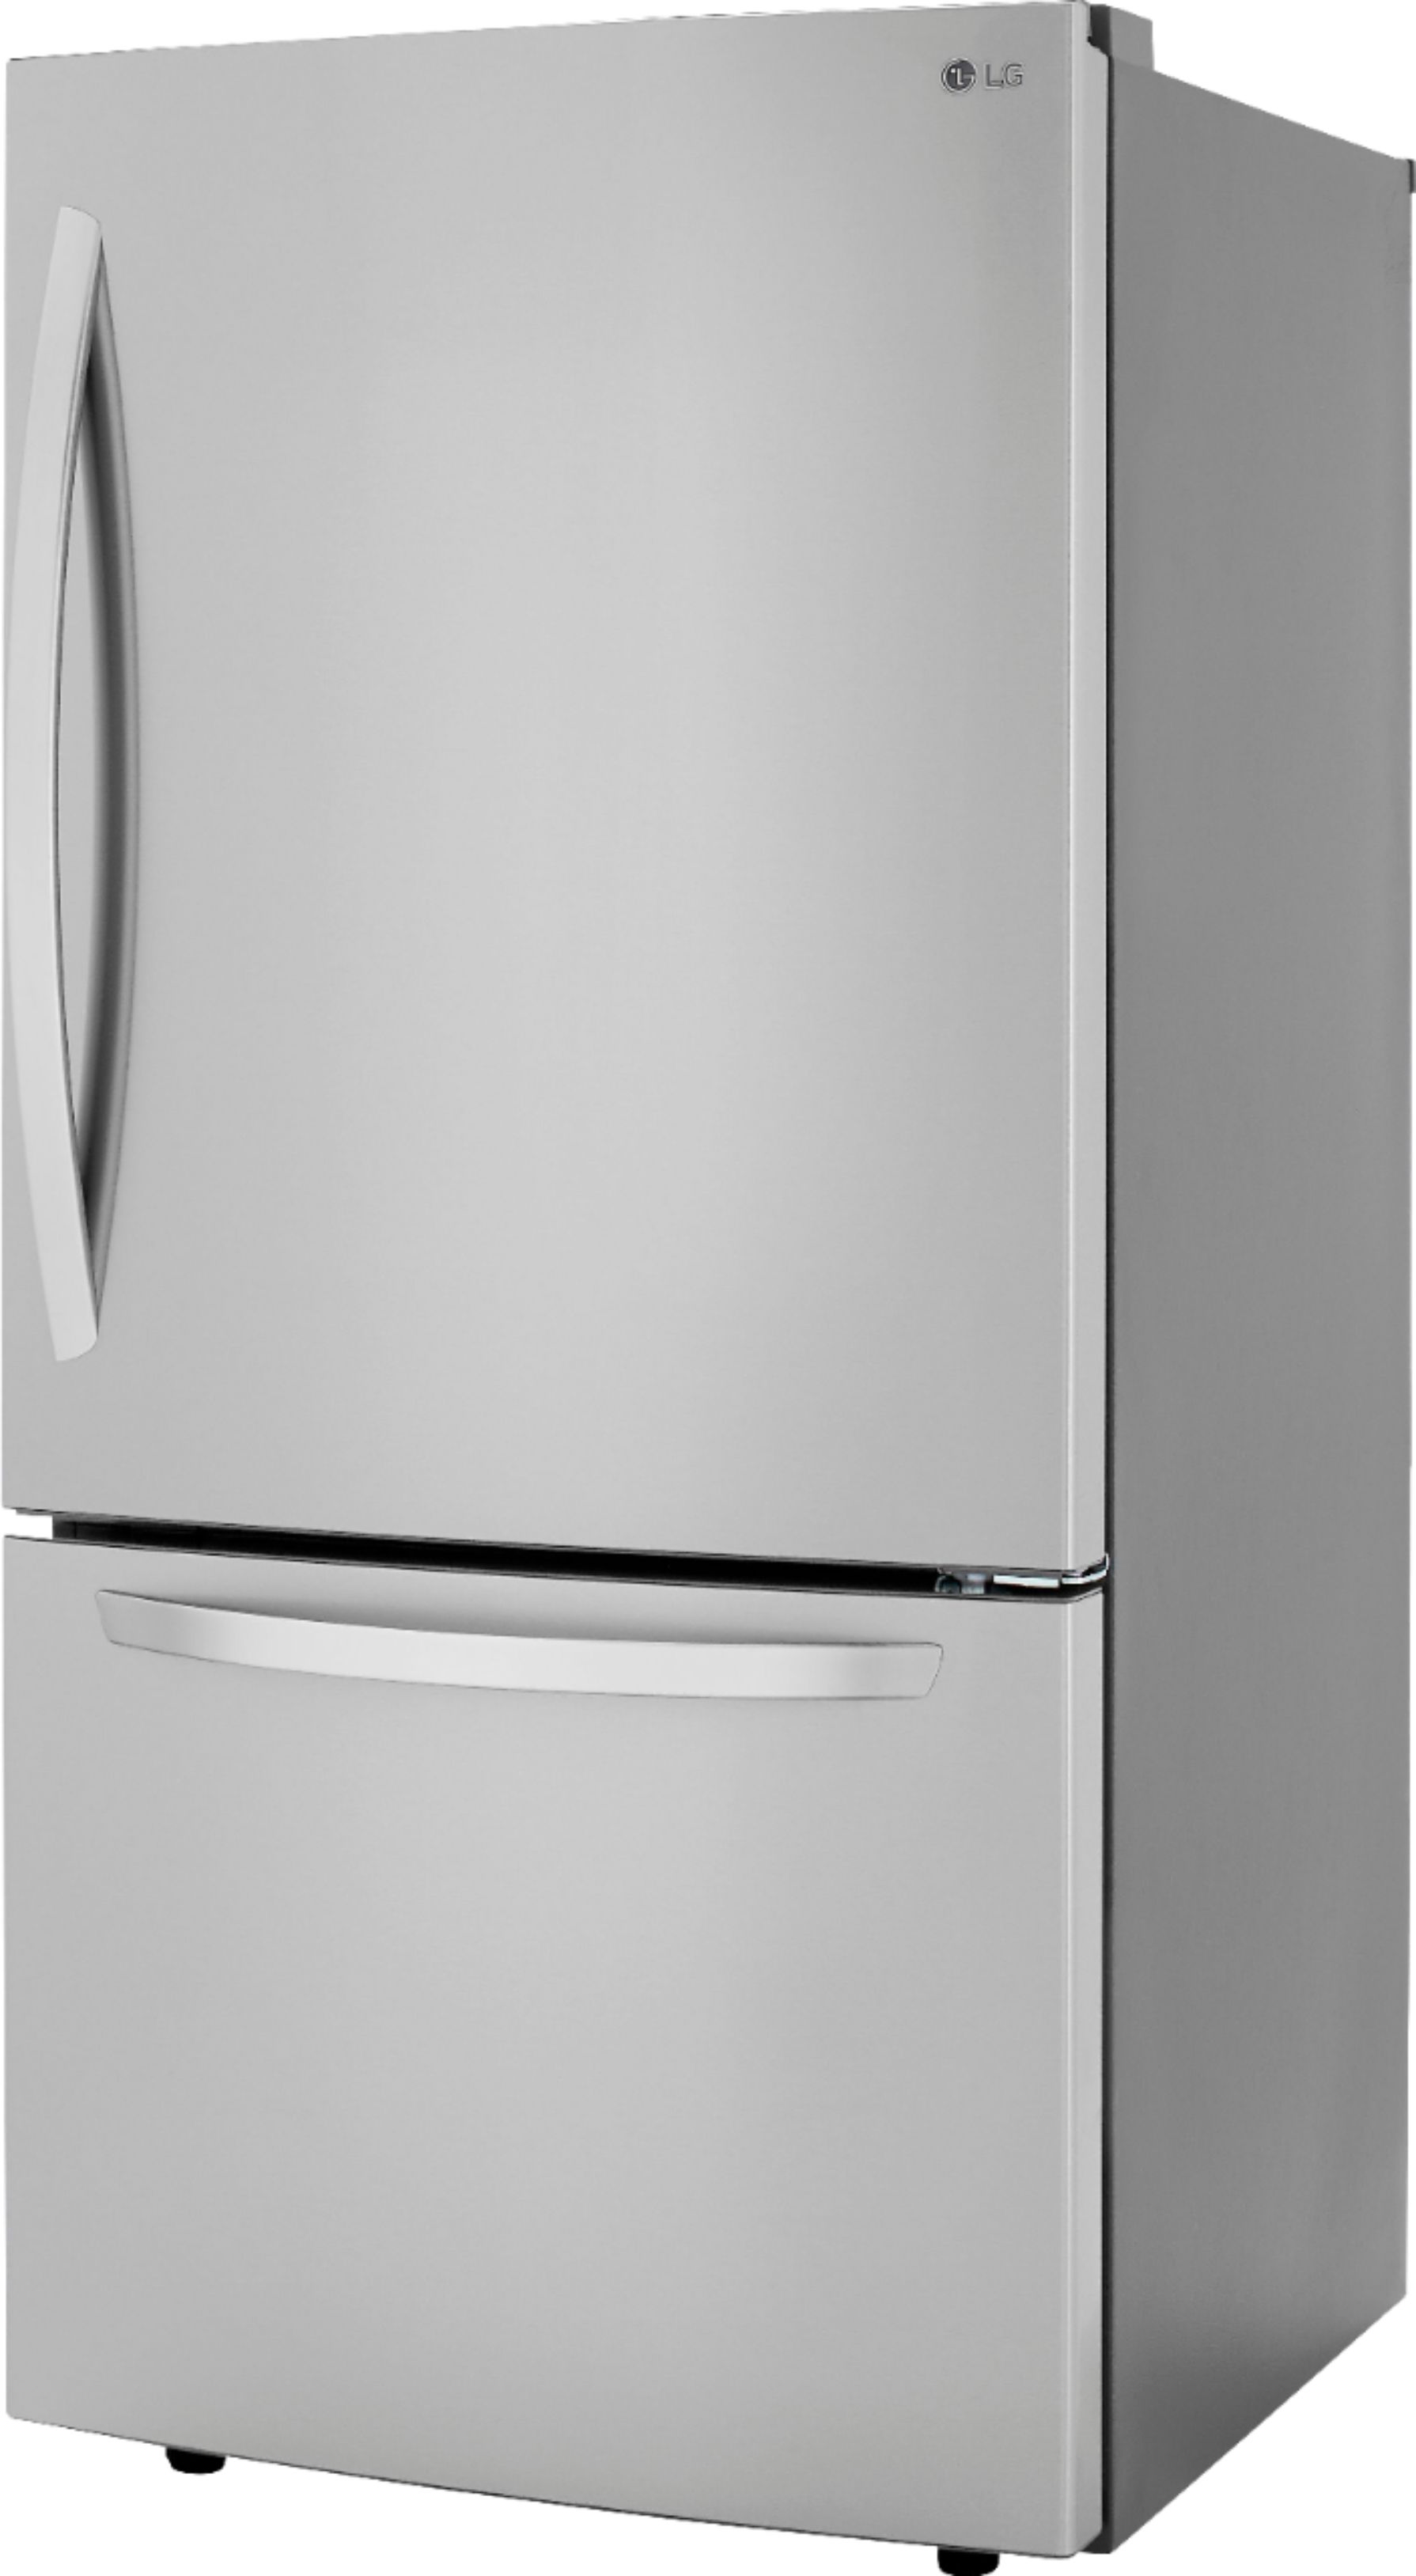 Left View: LG - 25.5 Cu. Ft. Bottom-Freezer Refrigerator with Ice Maker - Stainless Steel